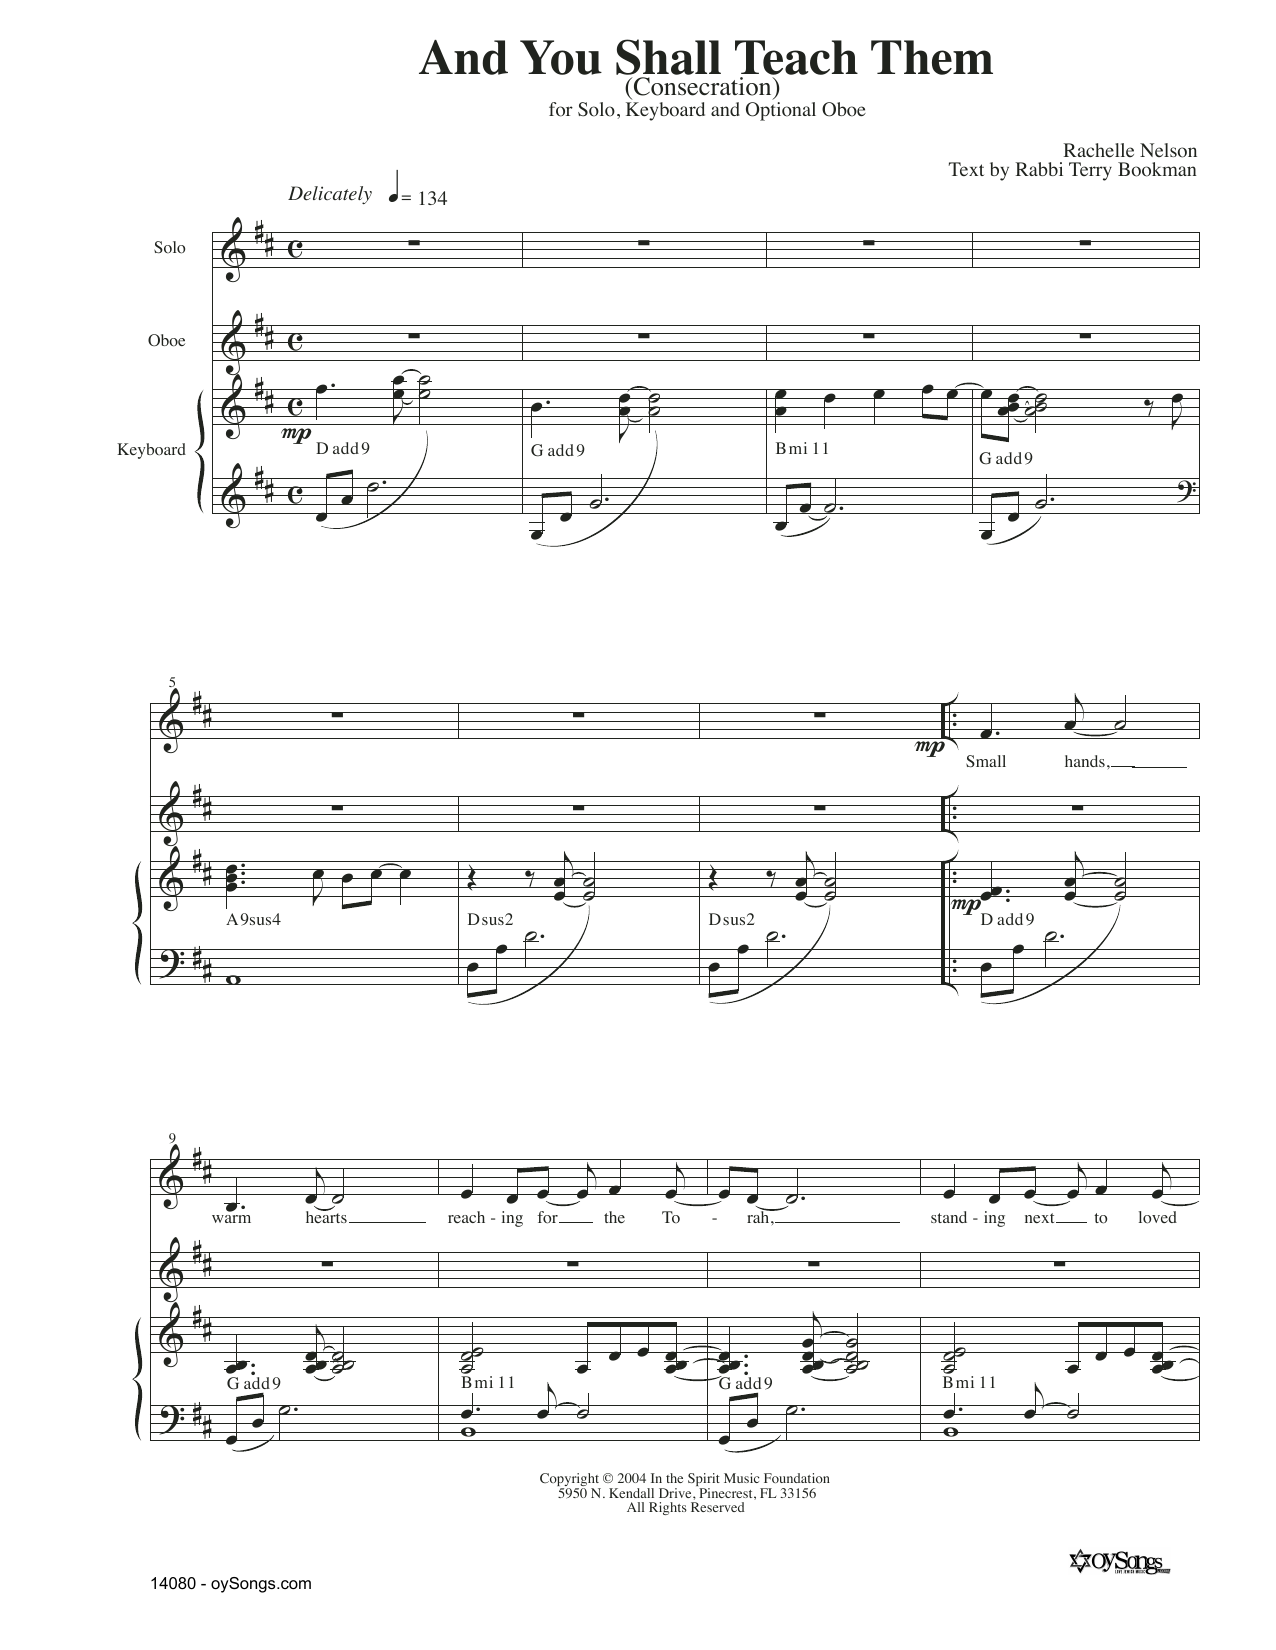 Download Rachelle Nelson And You Shall Teach Them (opt. Oboe) Sheet Music